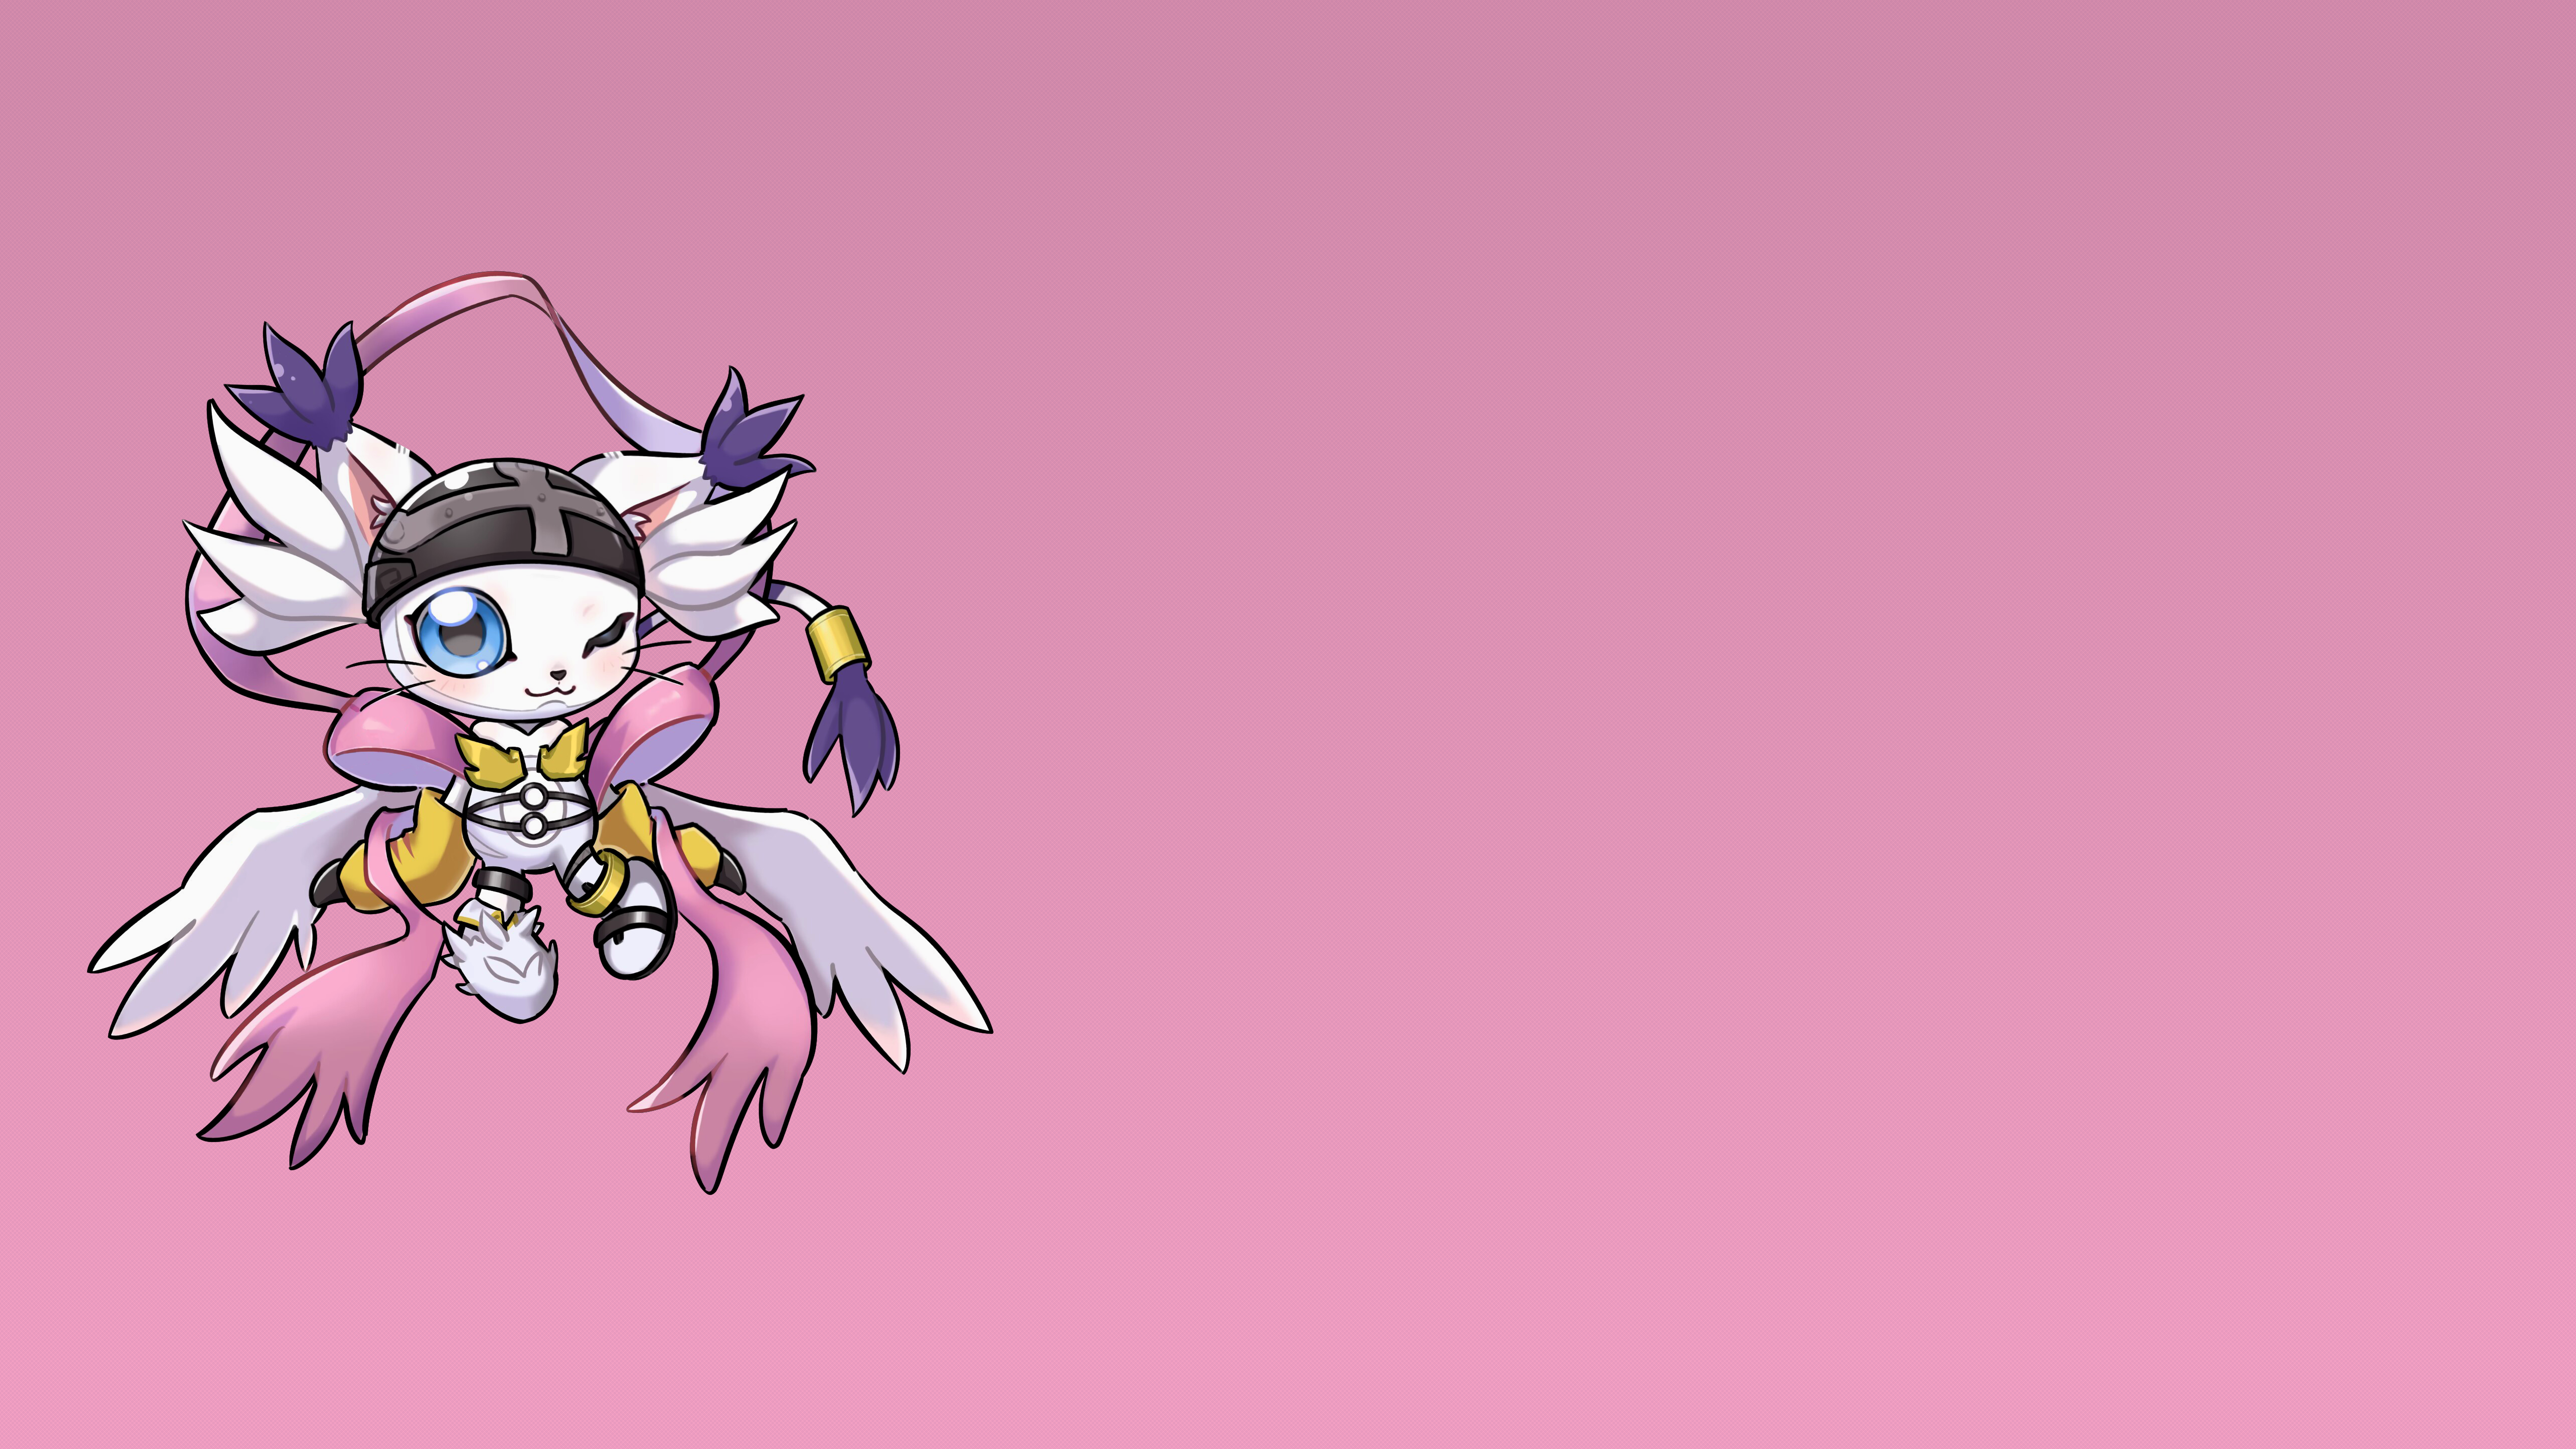 Boots Gloves Blue Eyes Looking At Viewer Digimon Gatomon Angewomon Cats Animals Claws Costumes Cospl 5120x2880